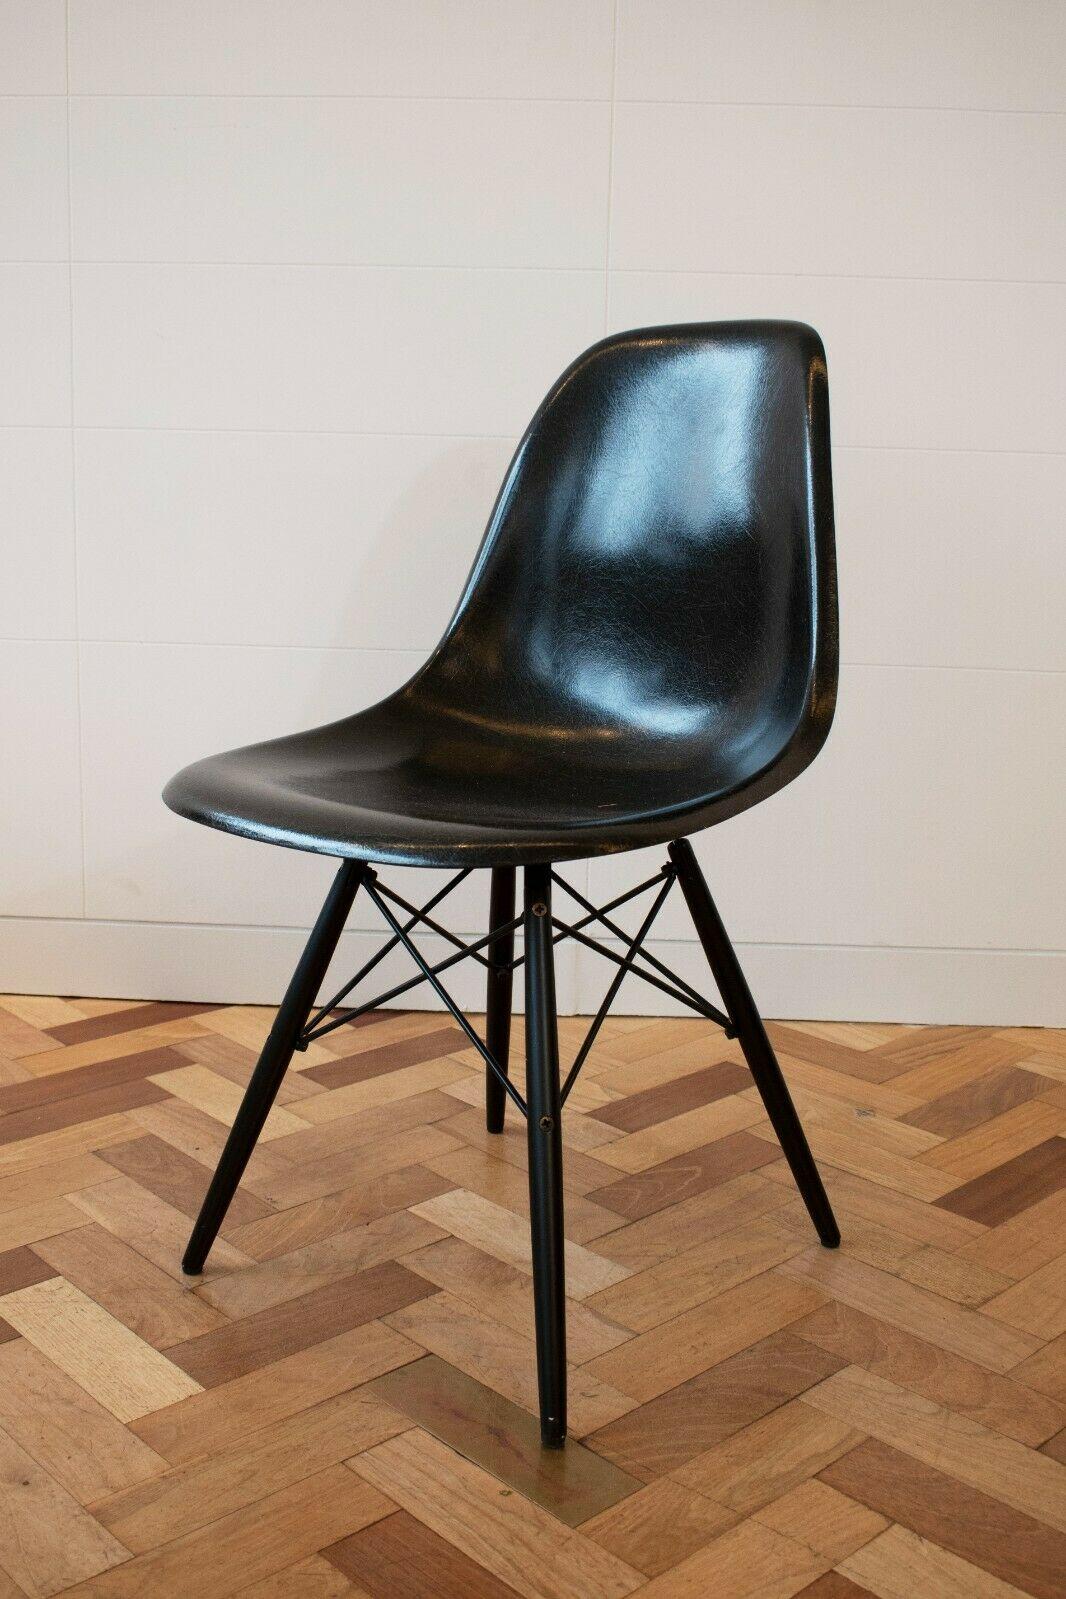 Central American Set of 8 1960s Fibreglass Chairs by Charles and Ray Eames for Herman Miller